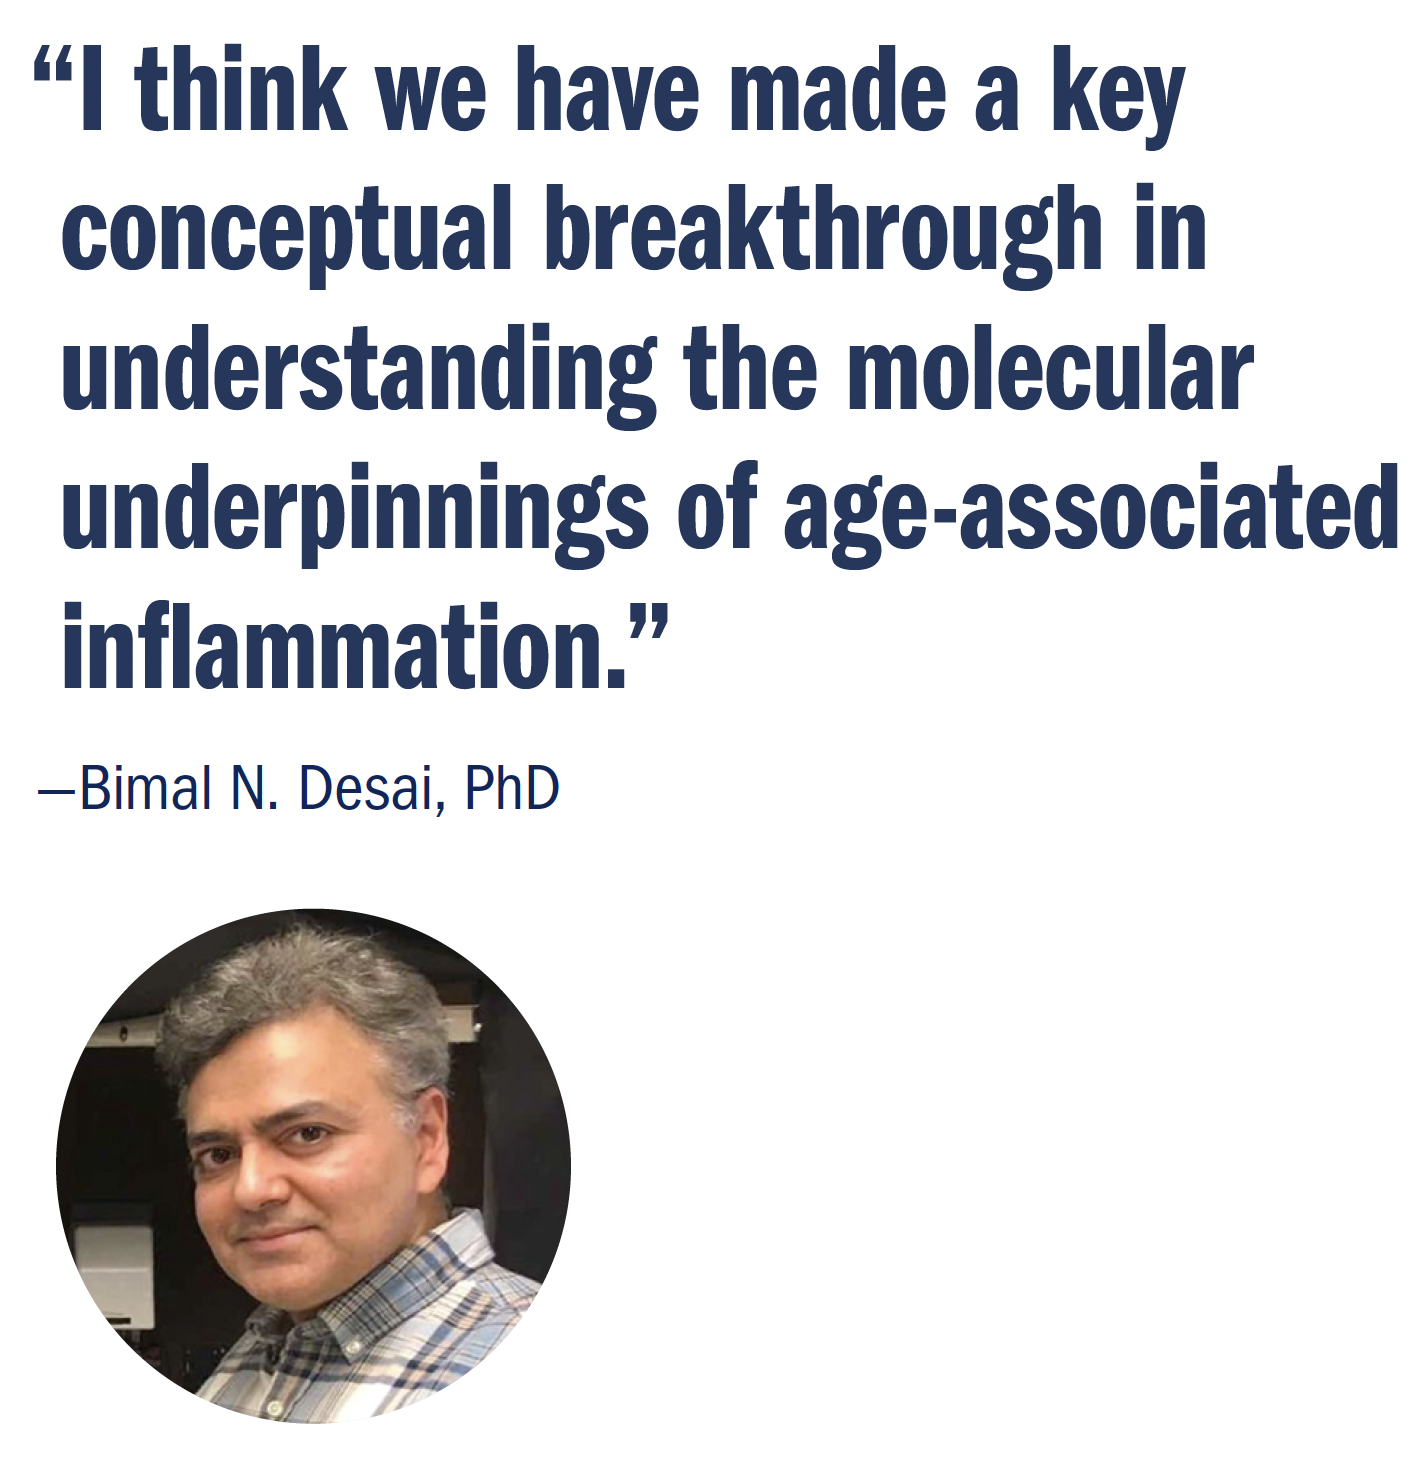 quote from Bimal: “I think we have made a key conceptual breakthrough in understanding the molecular underpinnings of age-associated inflammation.”